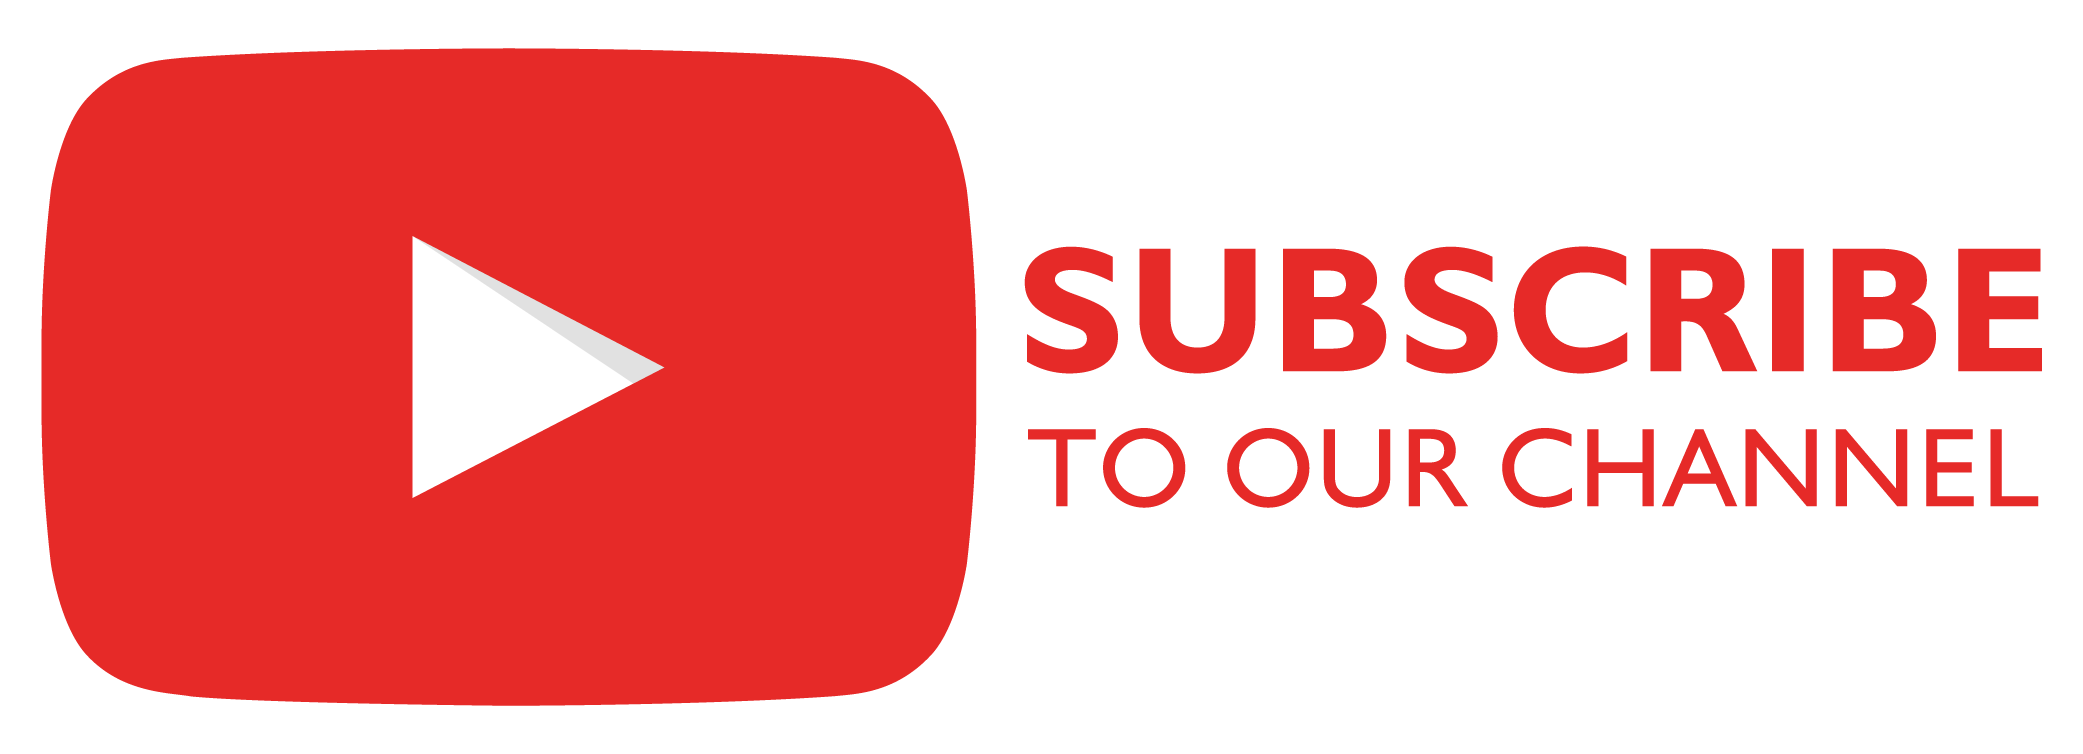 1516921061Subscribe-To-Our-Channel-Youtube